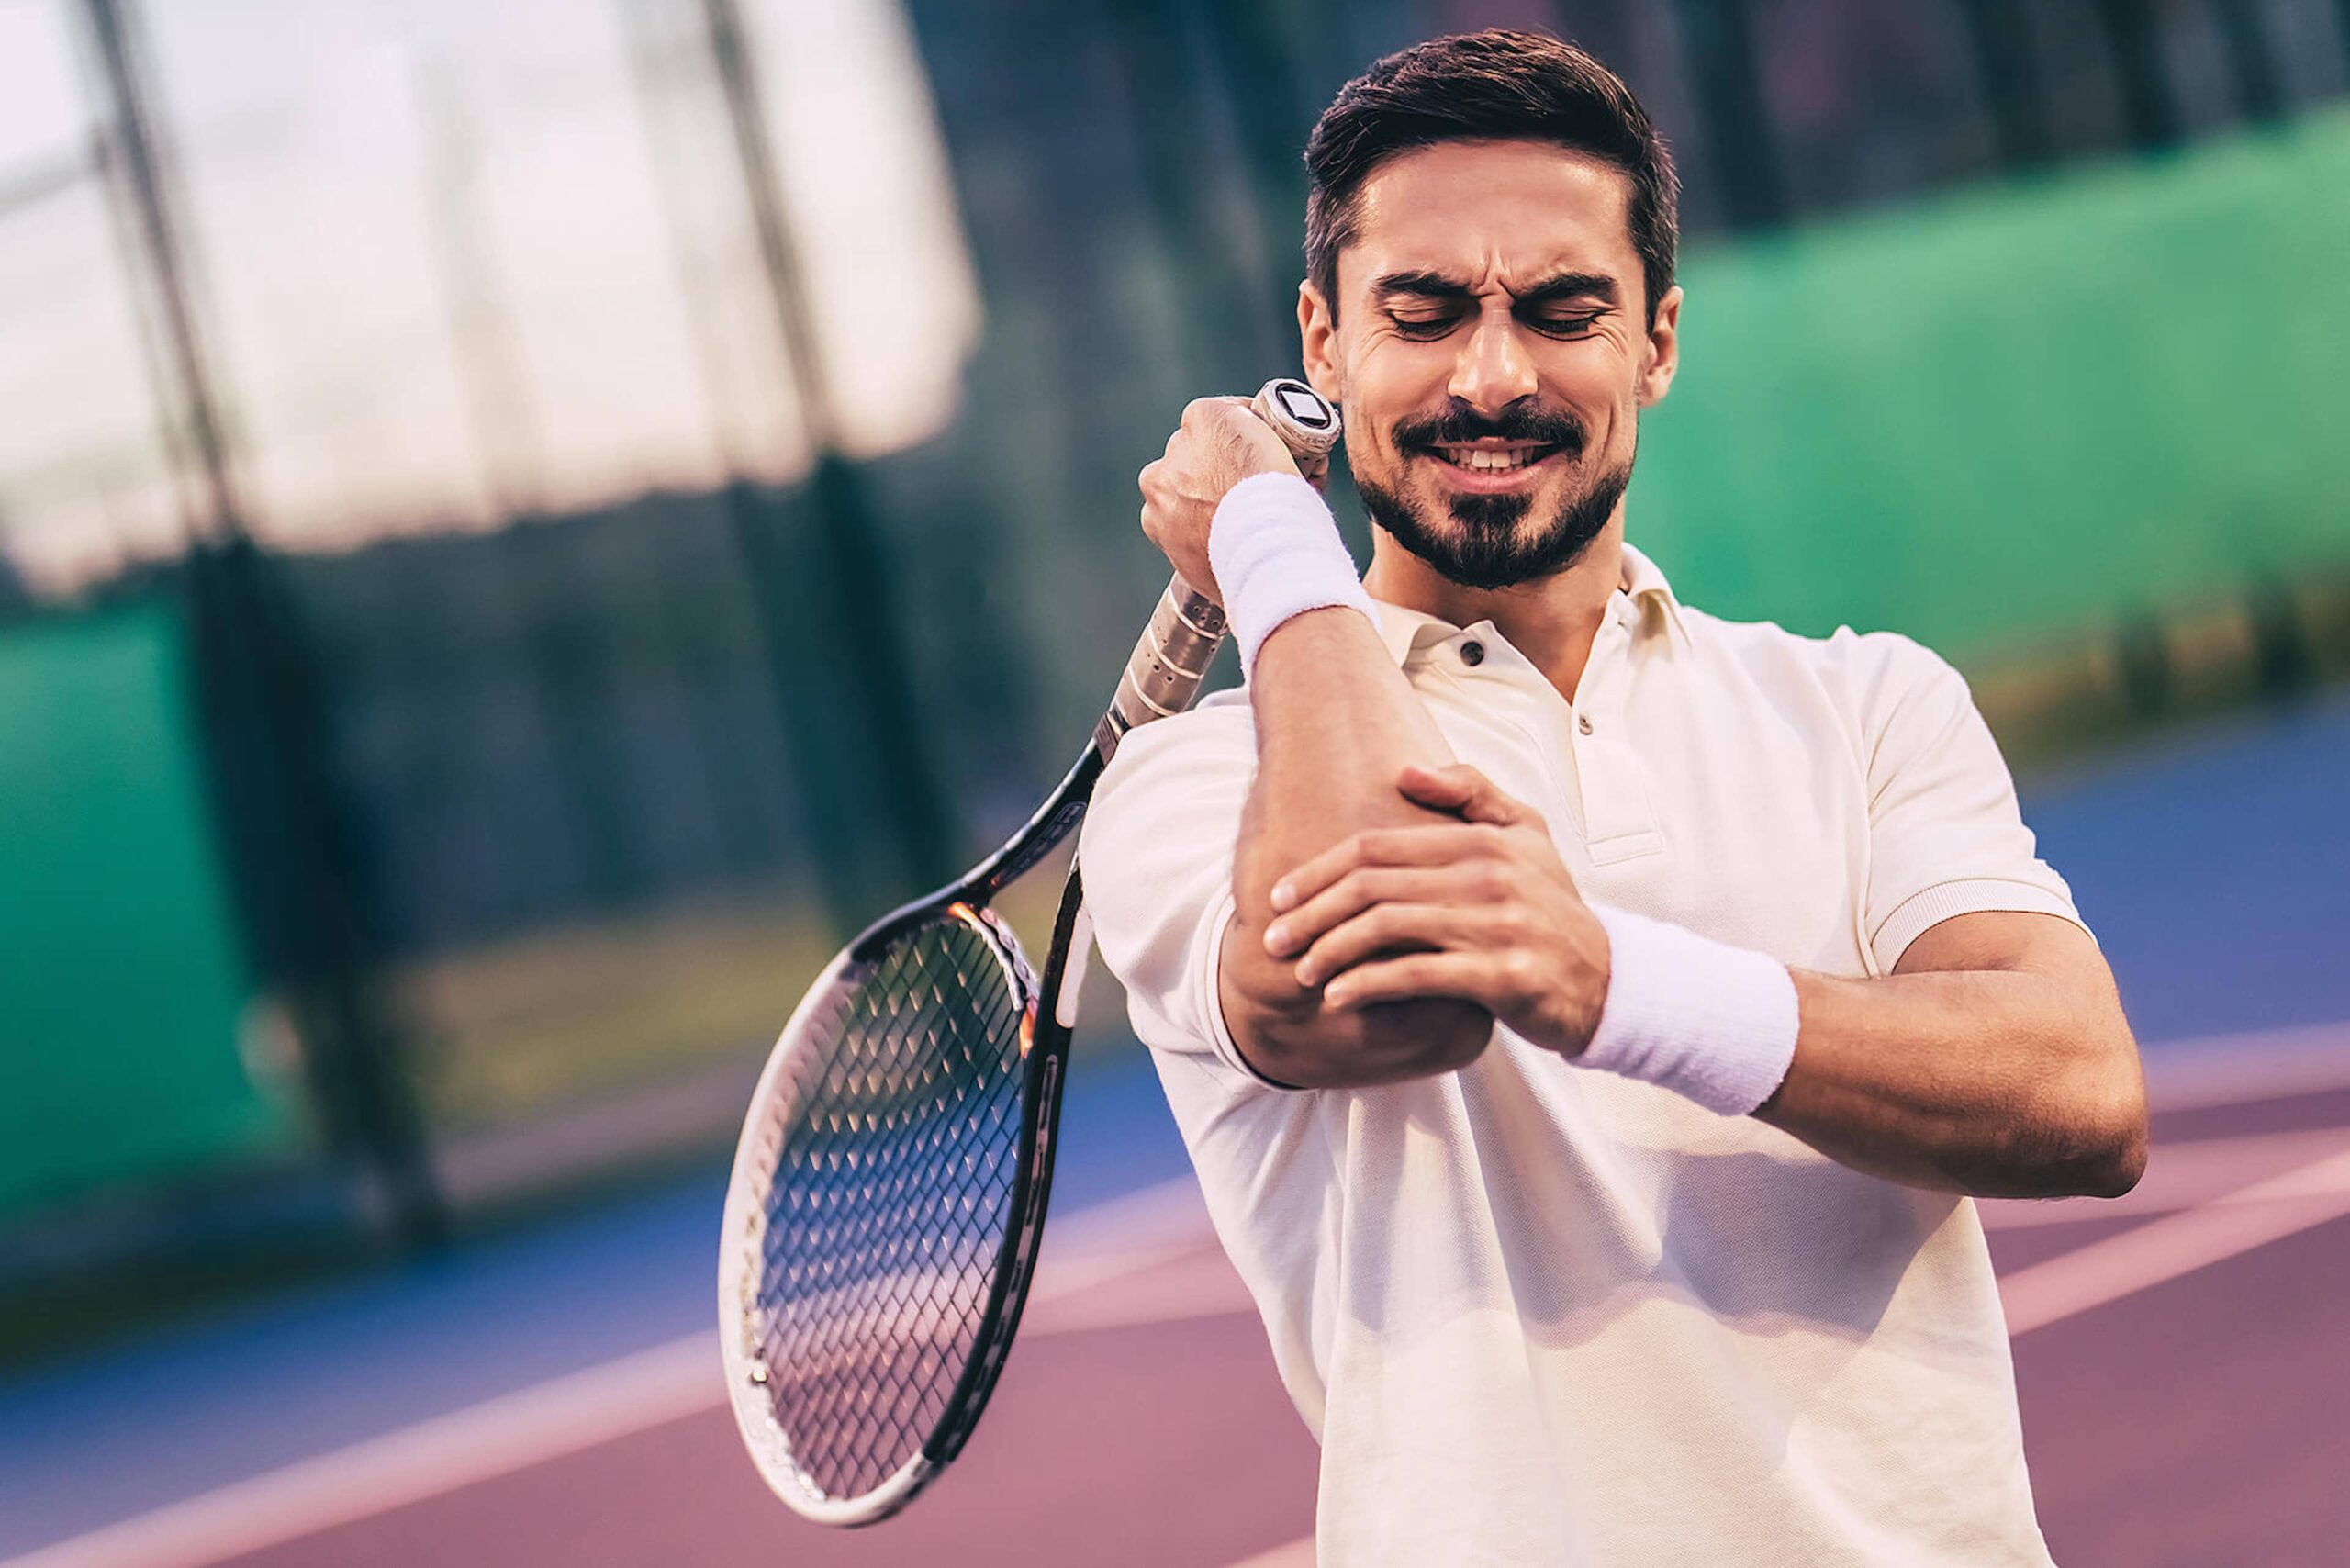 Tennis elbow occurs at the front of the elbow, often as a result of overuse. Visit Dr. Goradia of G2 Orthopedics to find relief from tennis elbow!